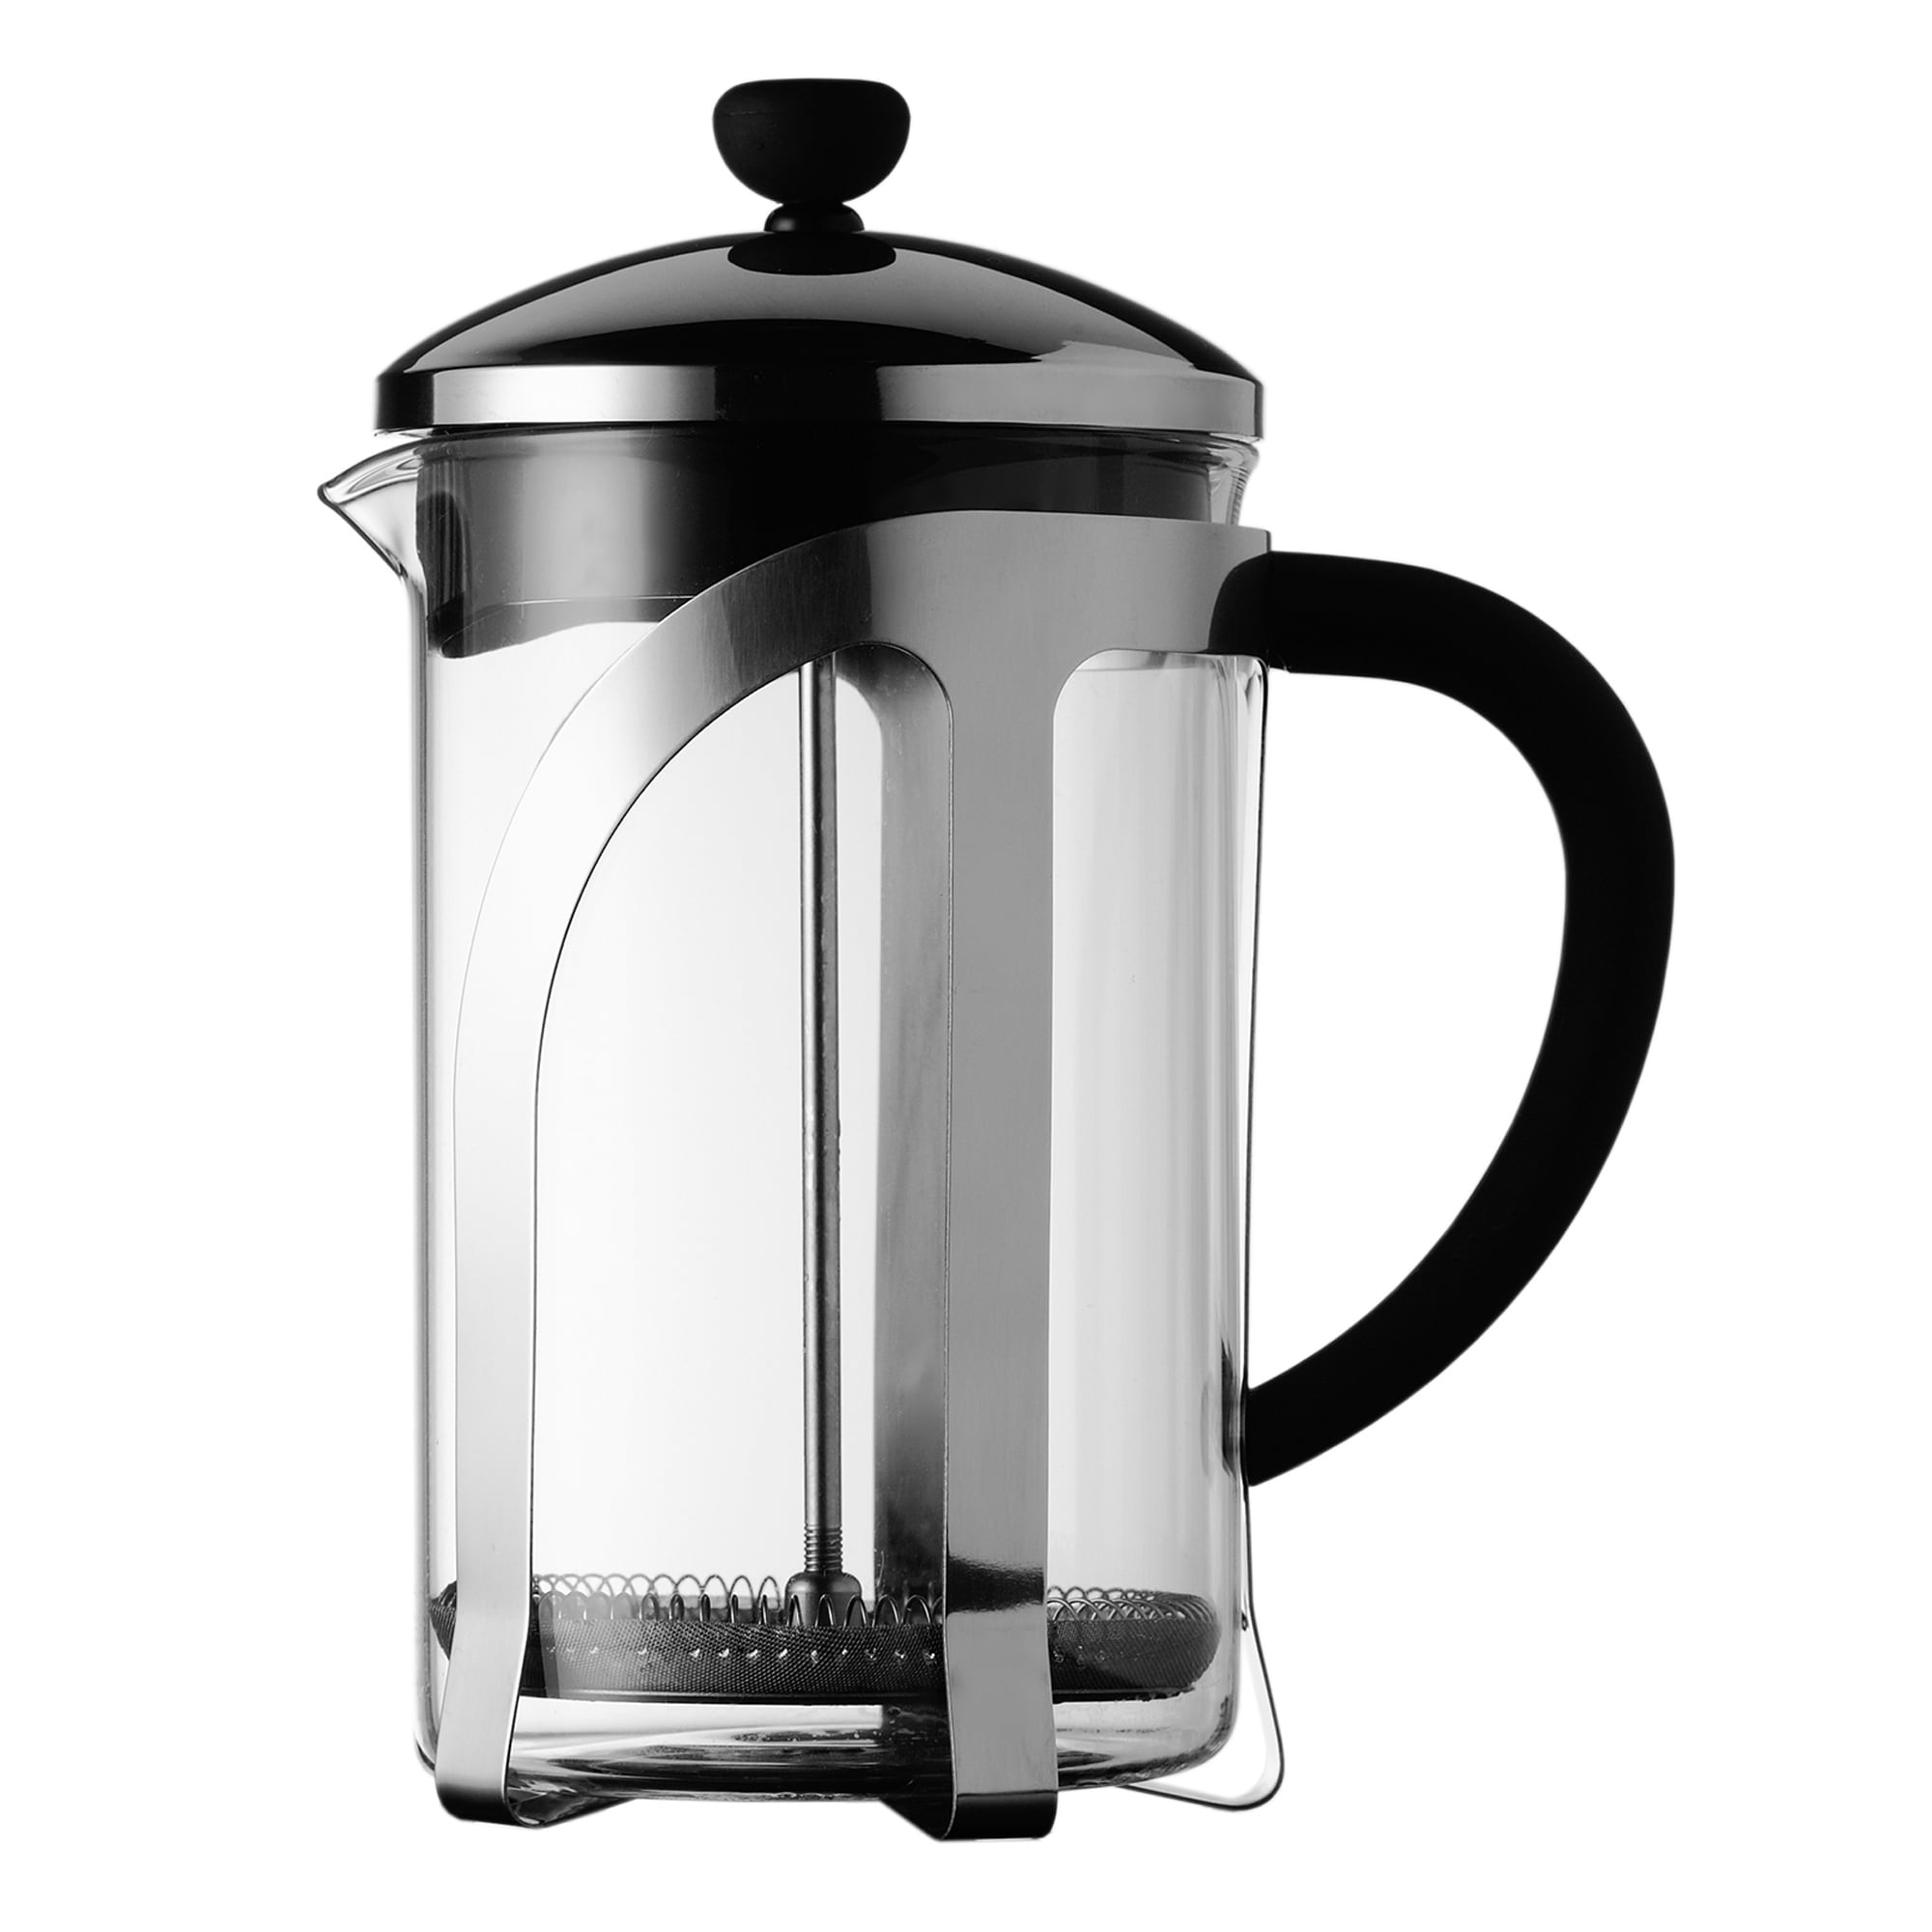 https://ak1.ostkcdn.com/images/products/is/images/direct/79d44ae850fe86a4d834071aa616b6cc671b2129/French-Press-Coffee-Maker-Percolator-Pot%2C800ml-Clear%2CInsulated.jpg